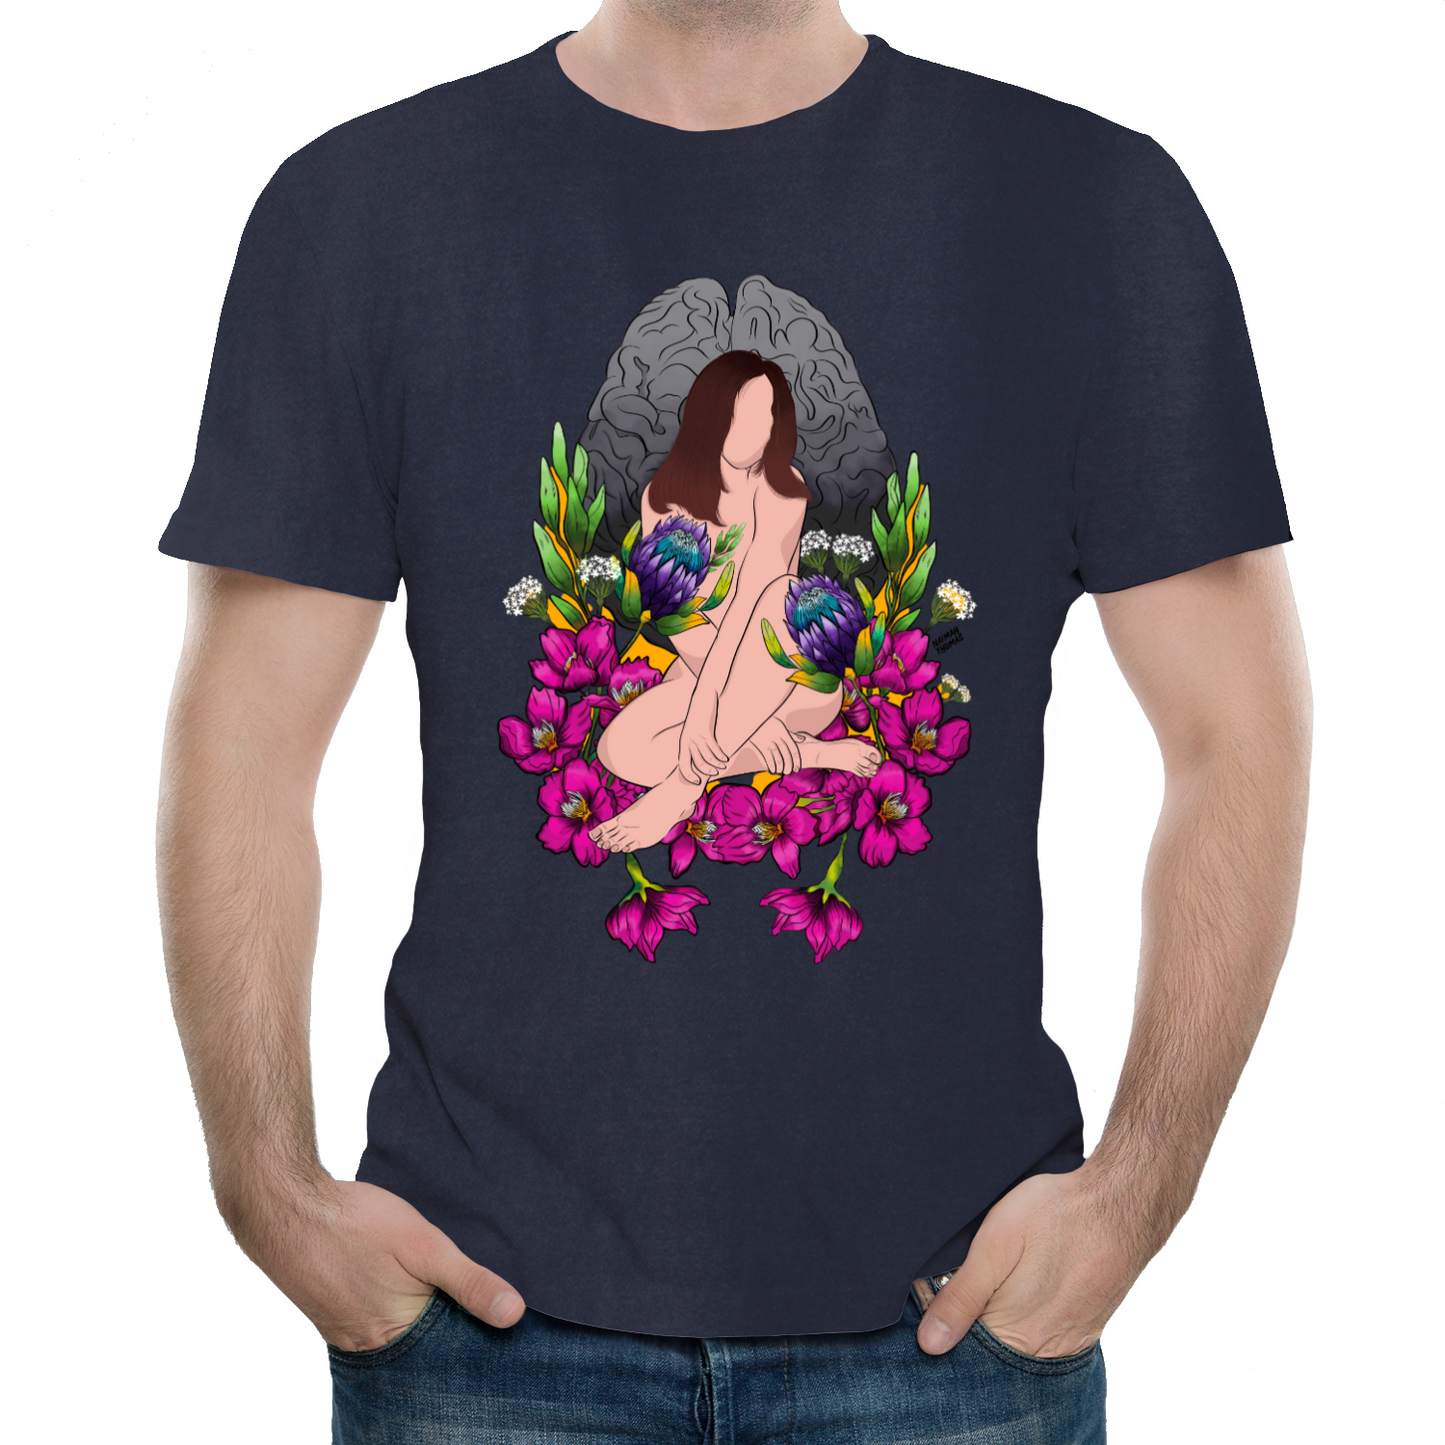 "Wandering amongst the cherry blossoms" Unisex Tee